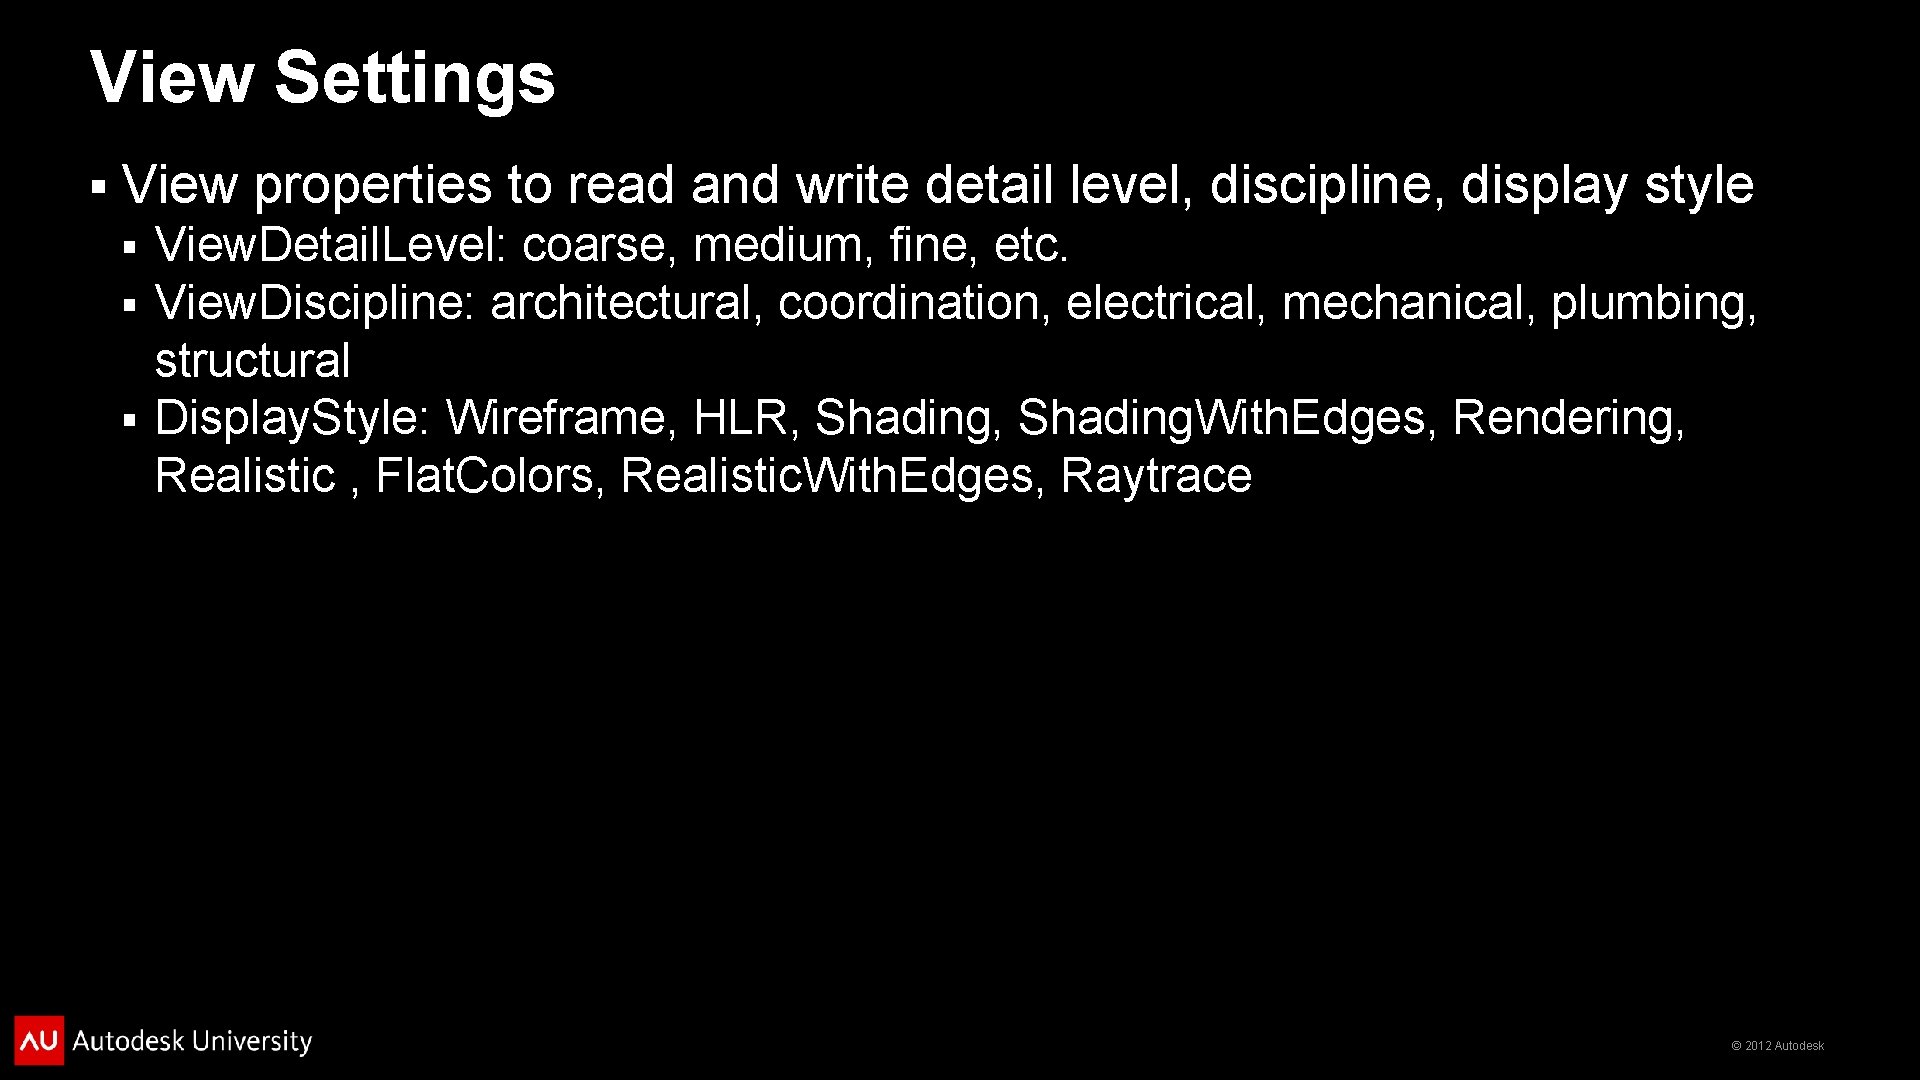 View Settings § View properties to read and write detail level, discipline, display style